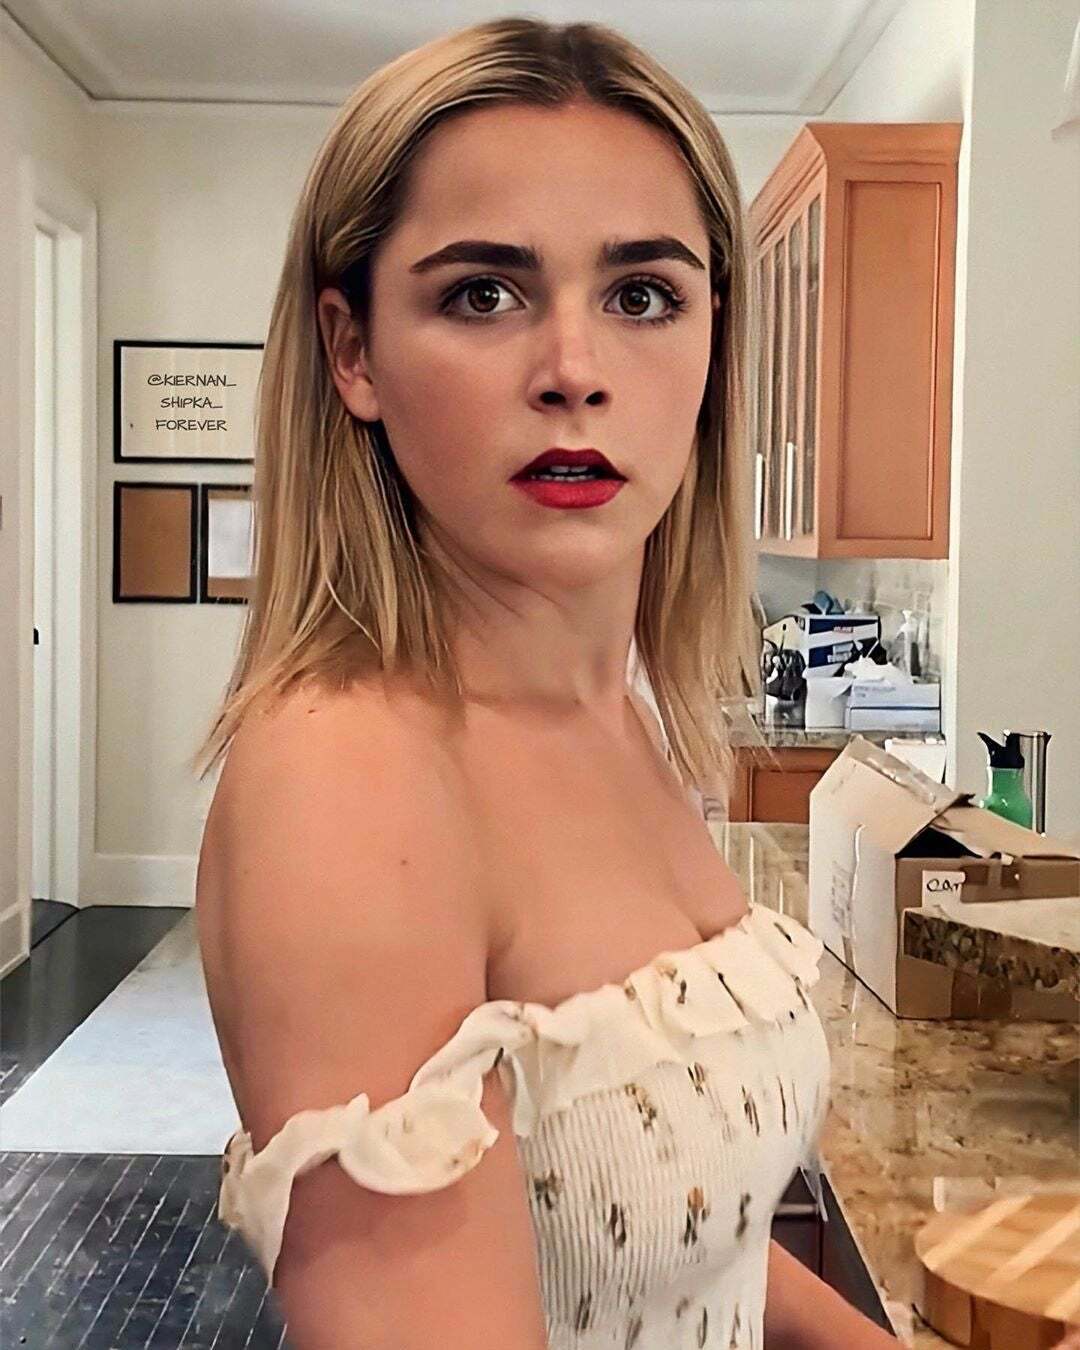 Kiernan Shipka's face when you tell her to bend over so you can take her pussy and put a baby in her belly